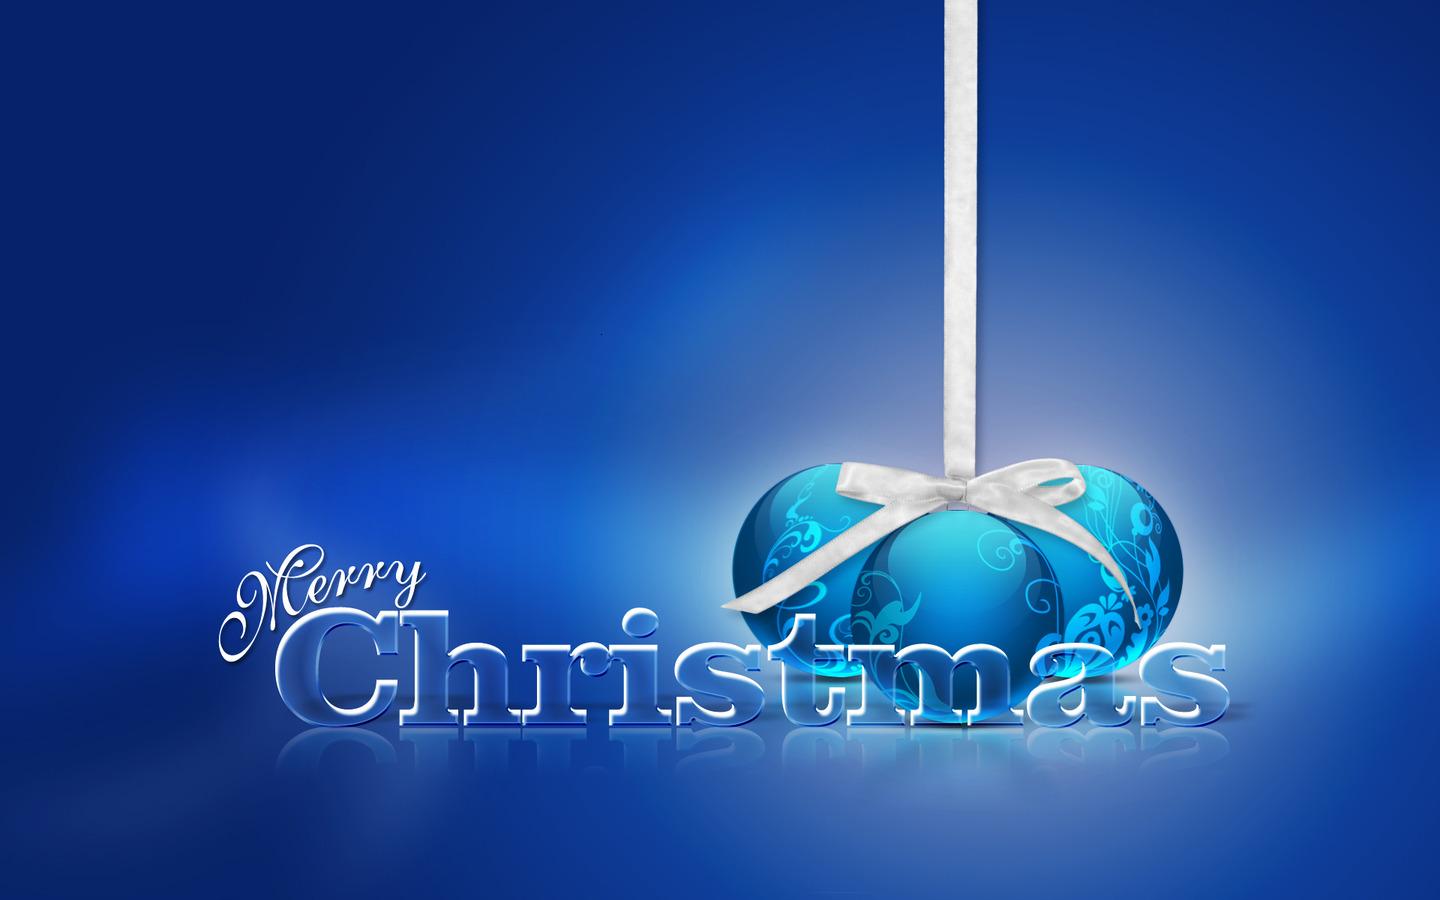 Christmas 3d Wallpapers Free Christmas 3d Wallpapers Download